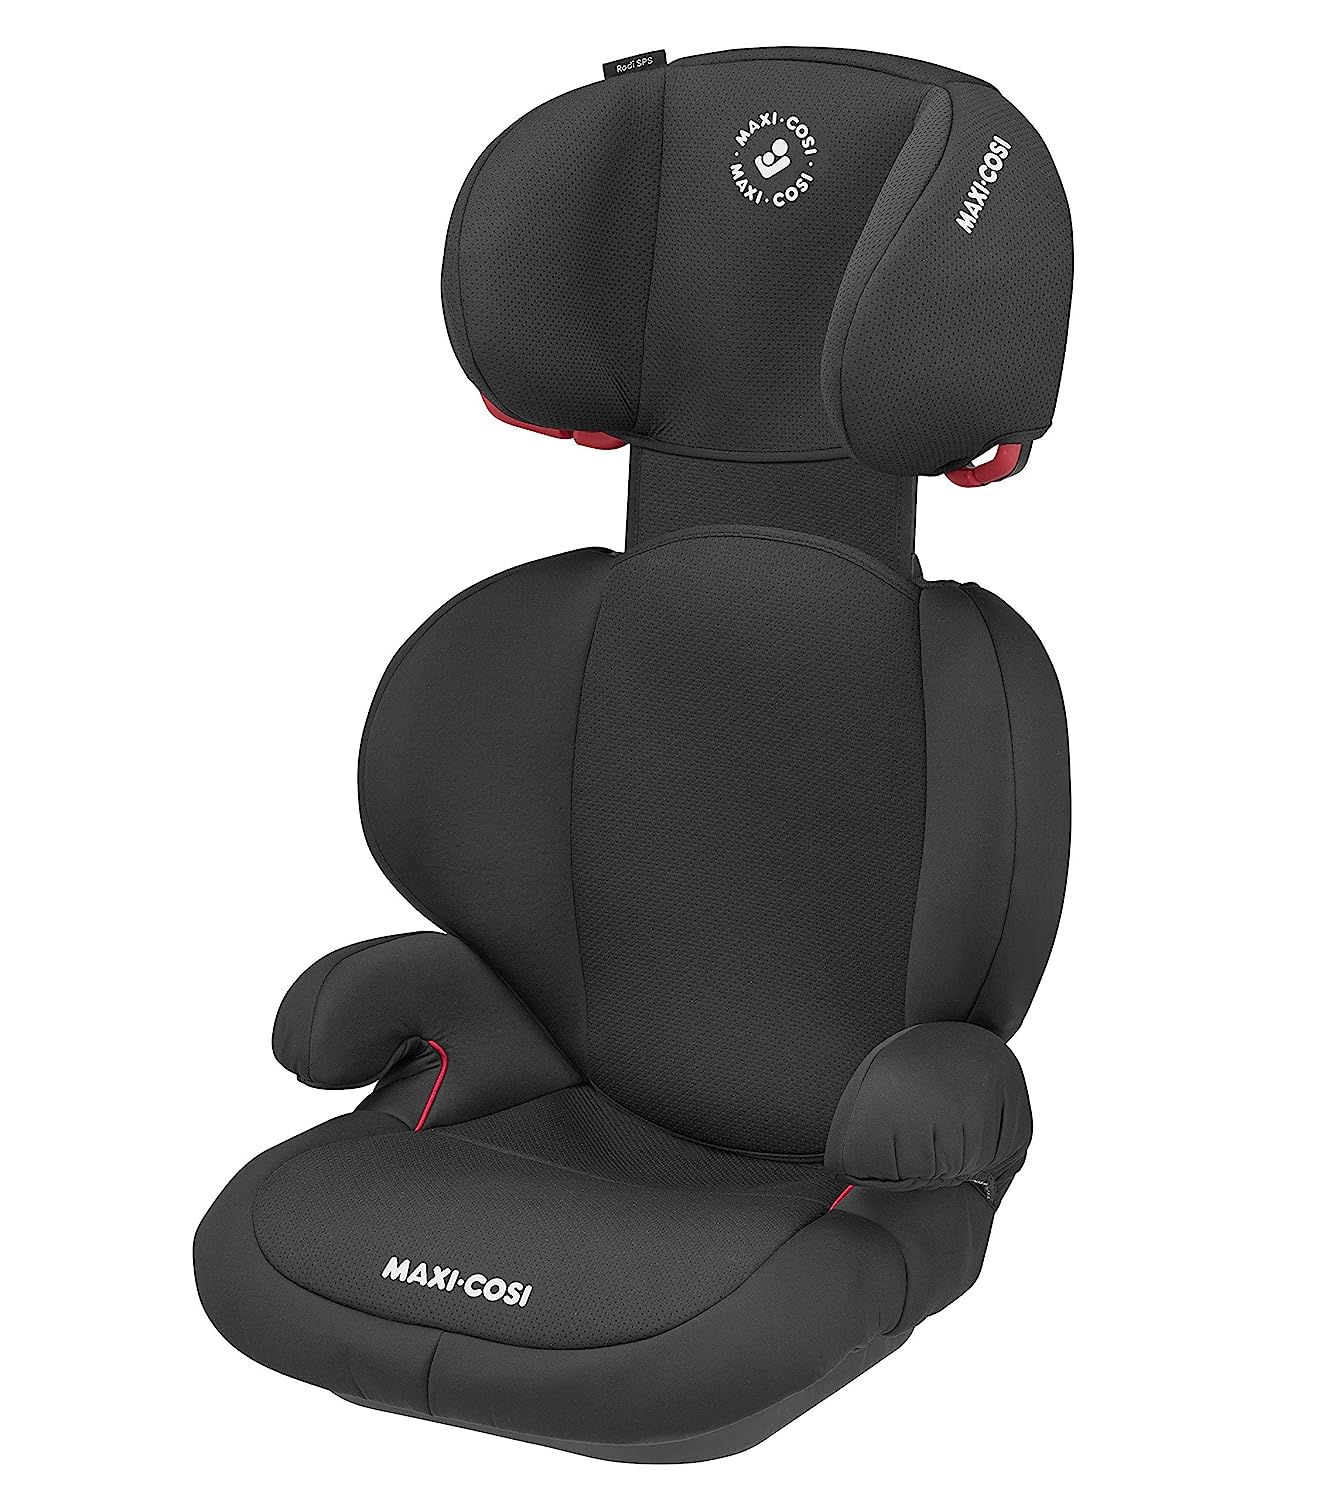 Maxi-Cosi Rodi SPS Child Seat Group 2/3 Car Seat (15-36 kg), Usable from Approx. 3.5 to Approx. 12 Years, Basic Black